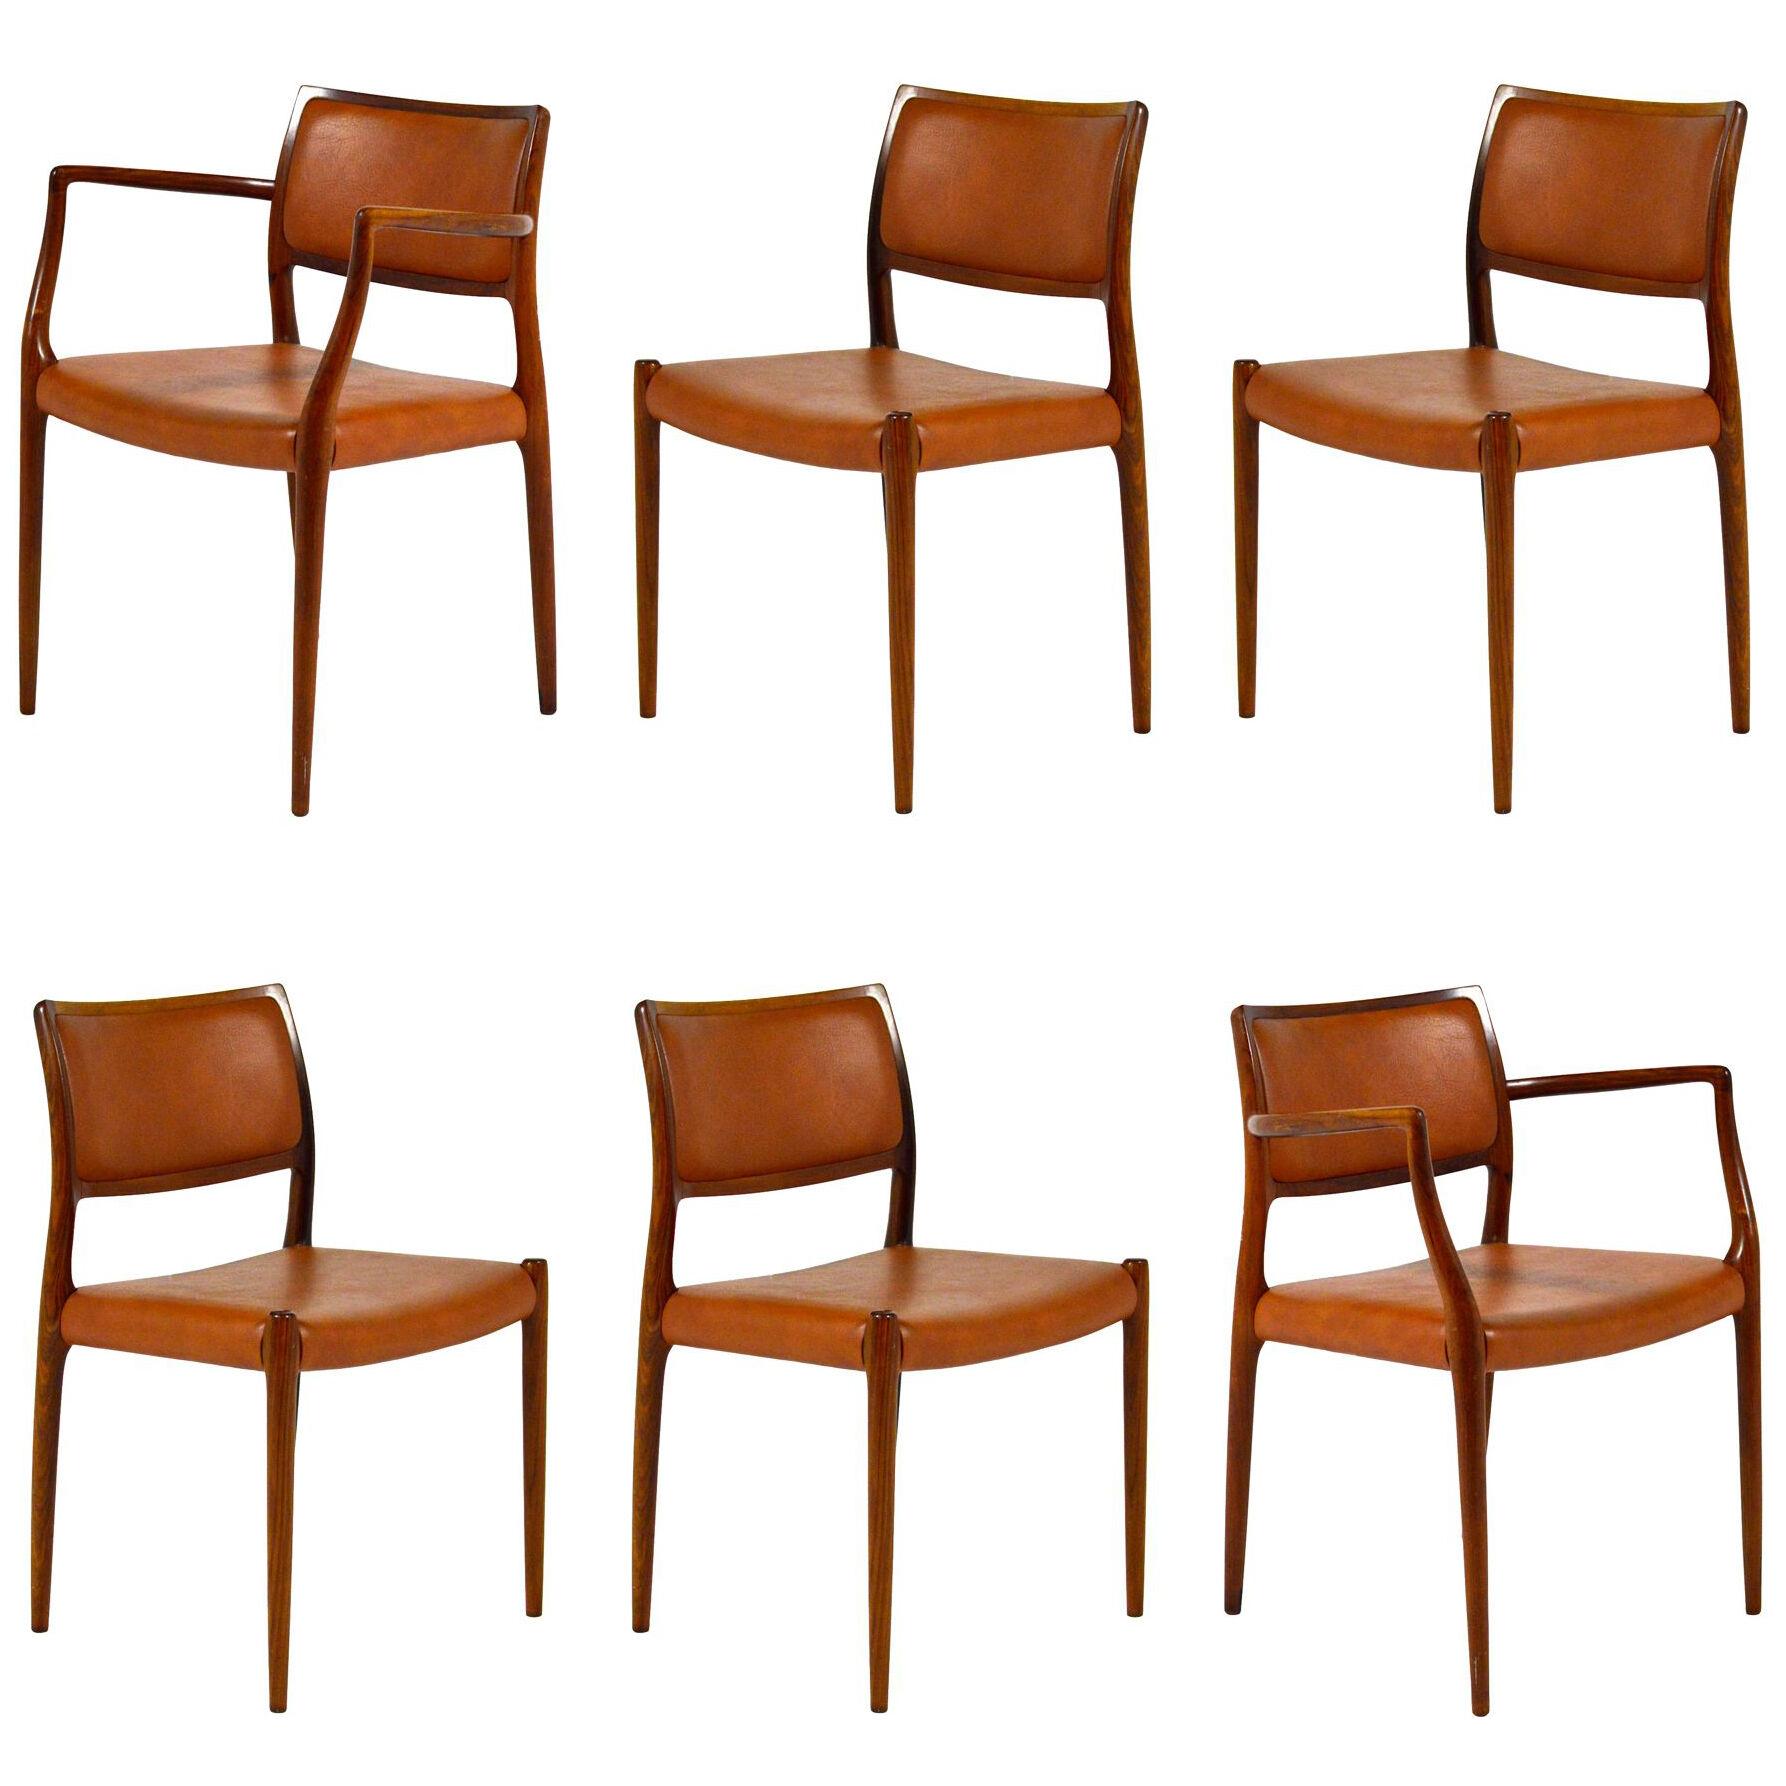 N.O. Møller Model 80 & 65 Rosewood Chairs Set of Six